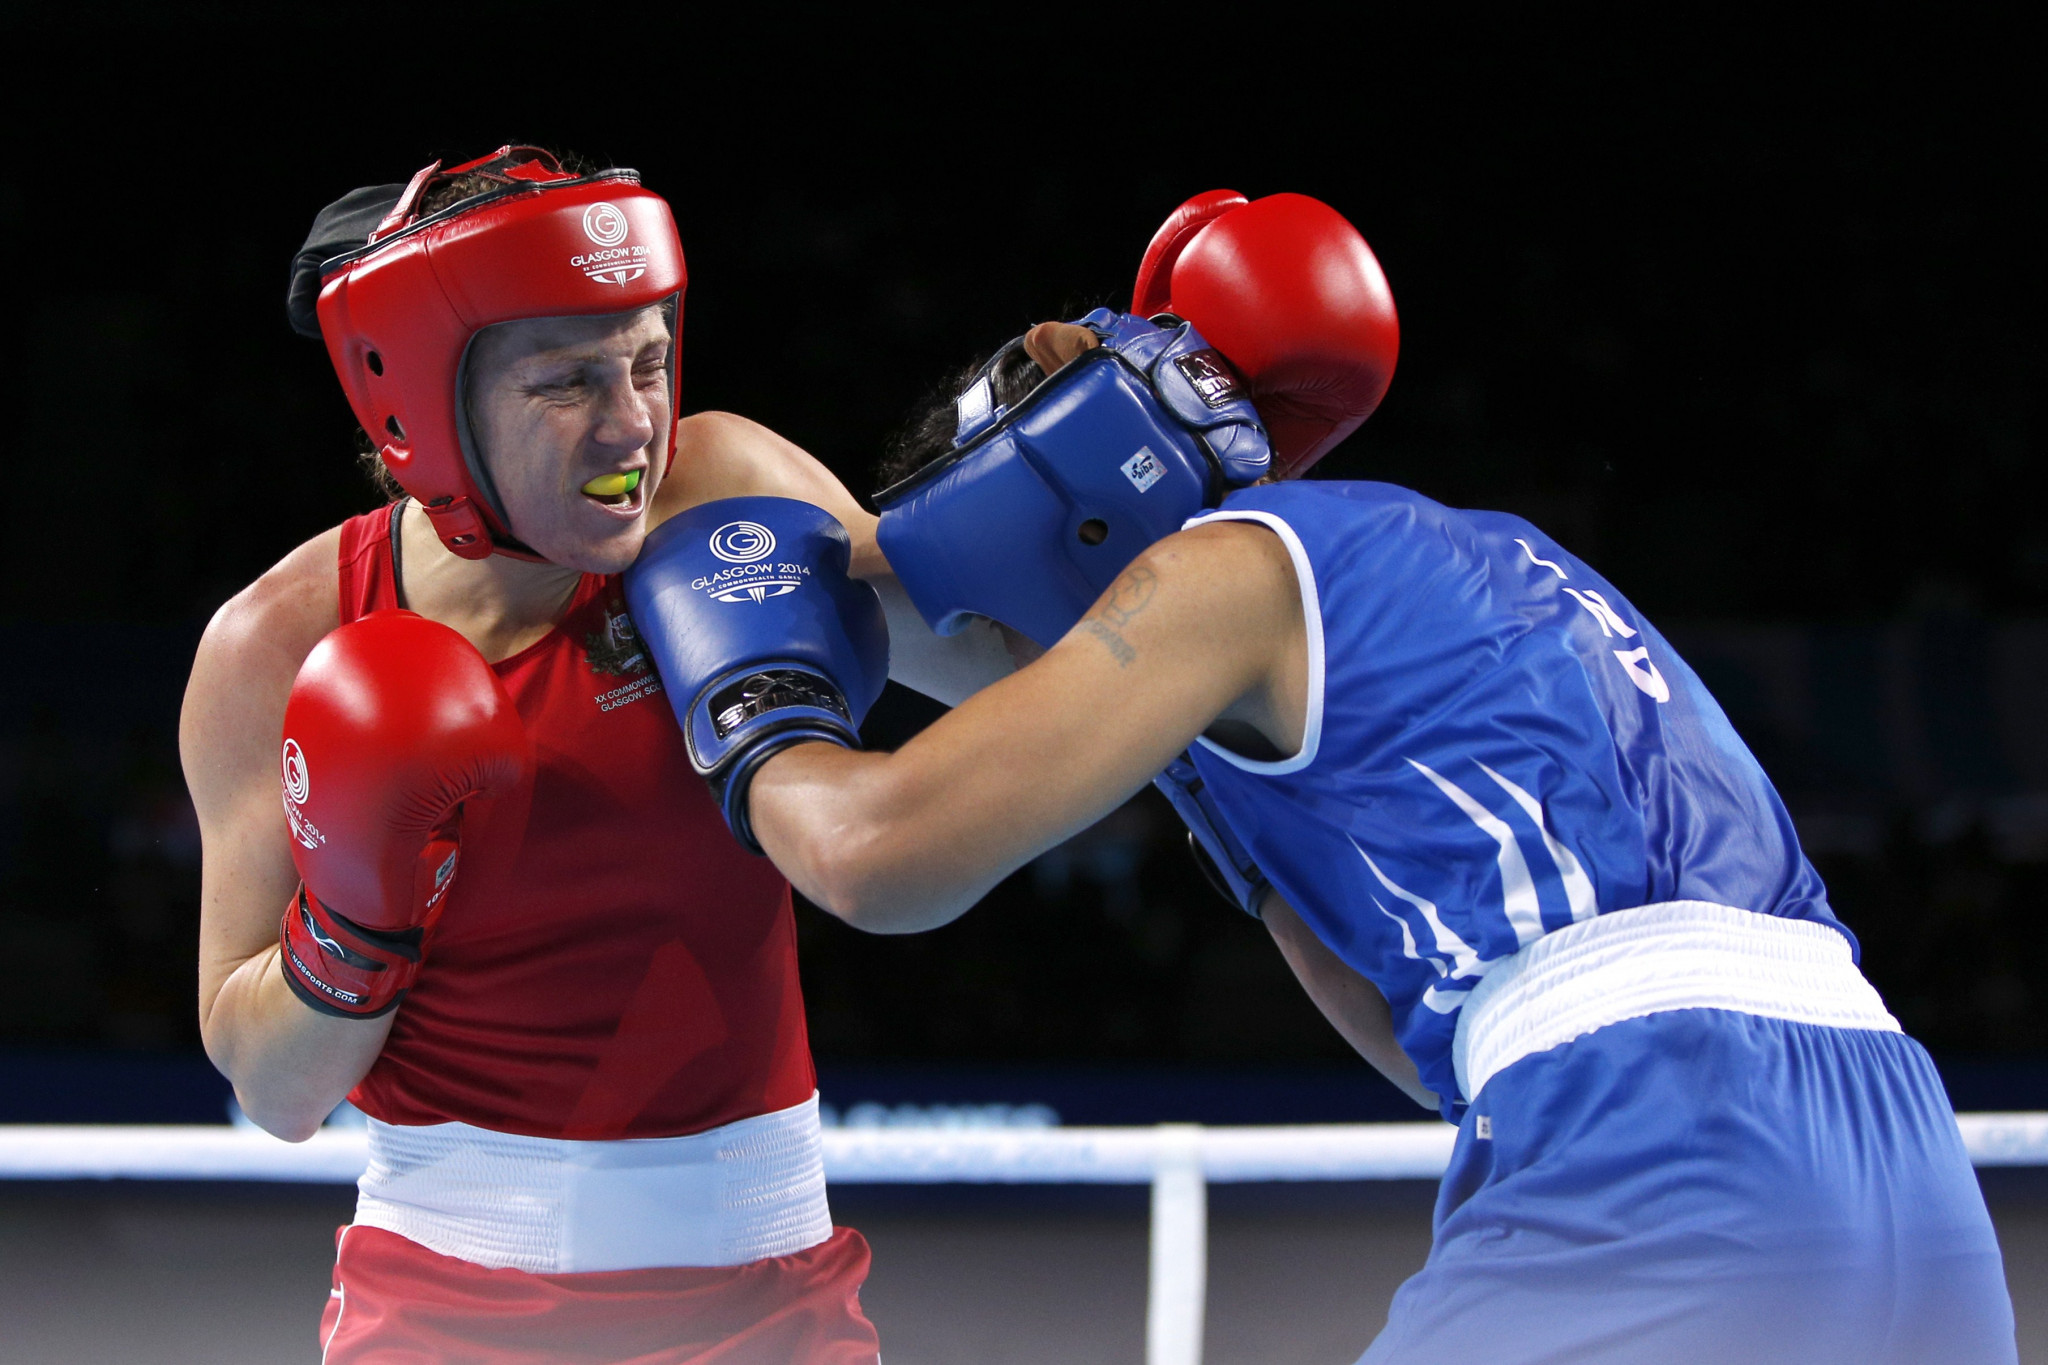 Australia's Shelley Watts beat India's Laishram Devi in the final of the lightweight division to claim the Commonwealth Games gold medal at Glasgow 2014 ©Getty Images